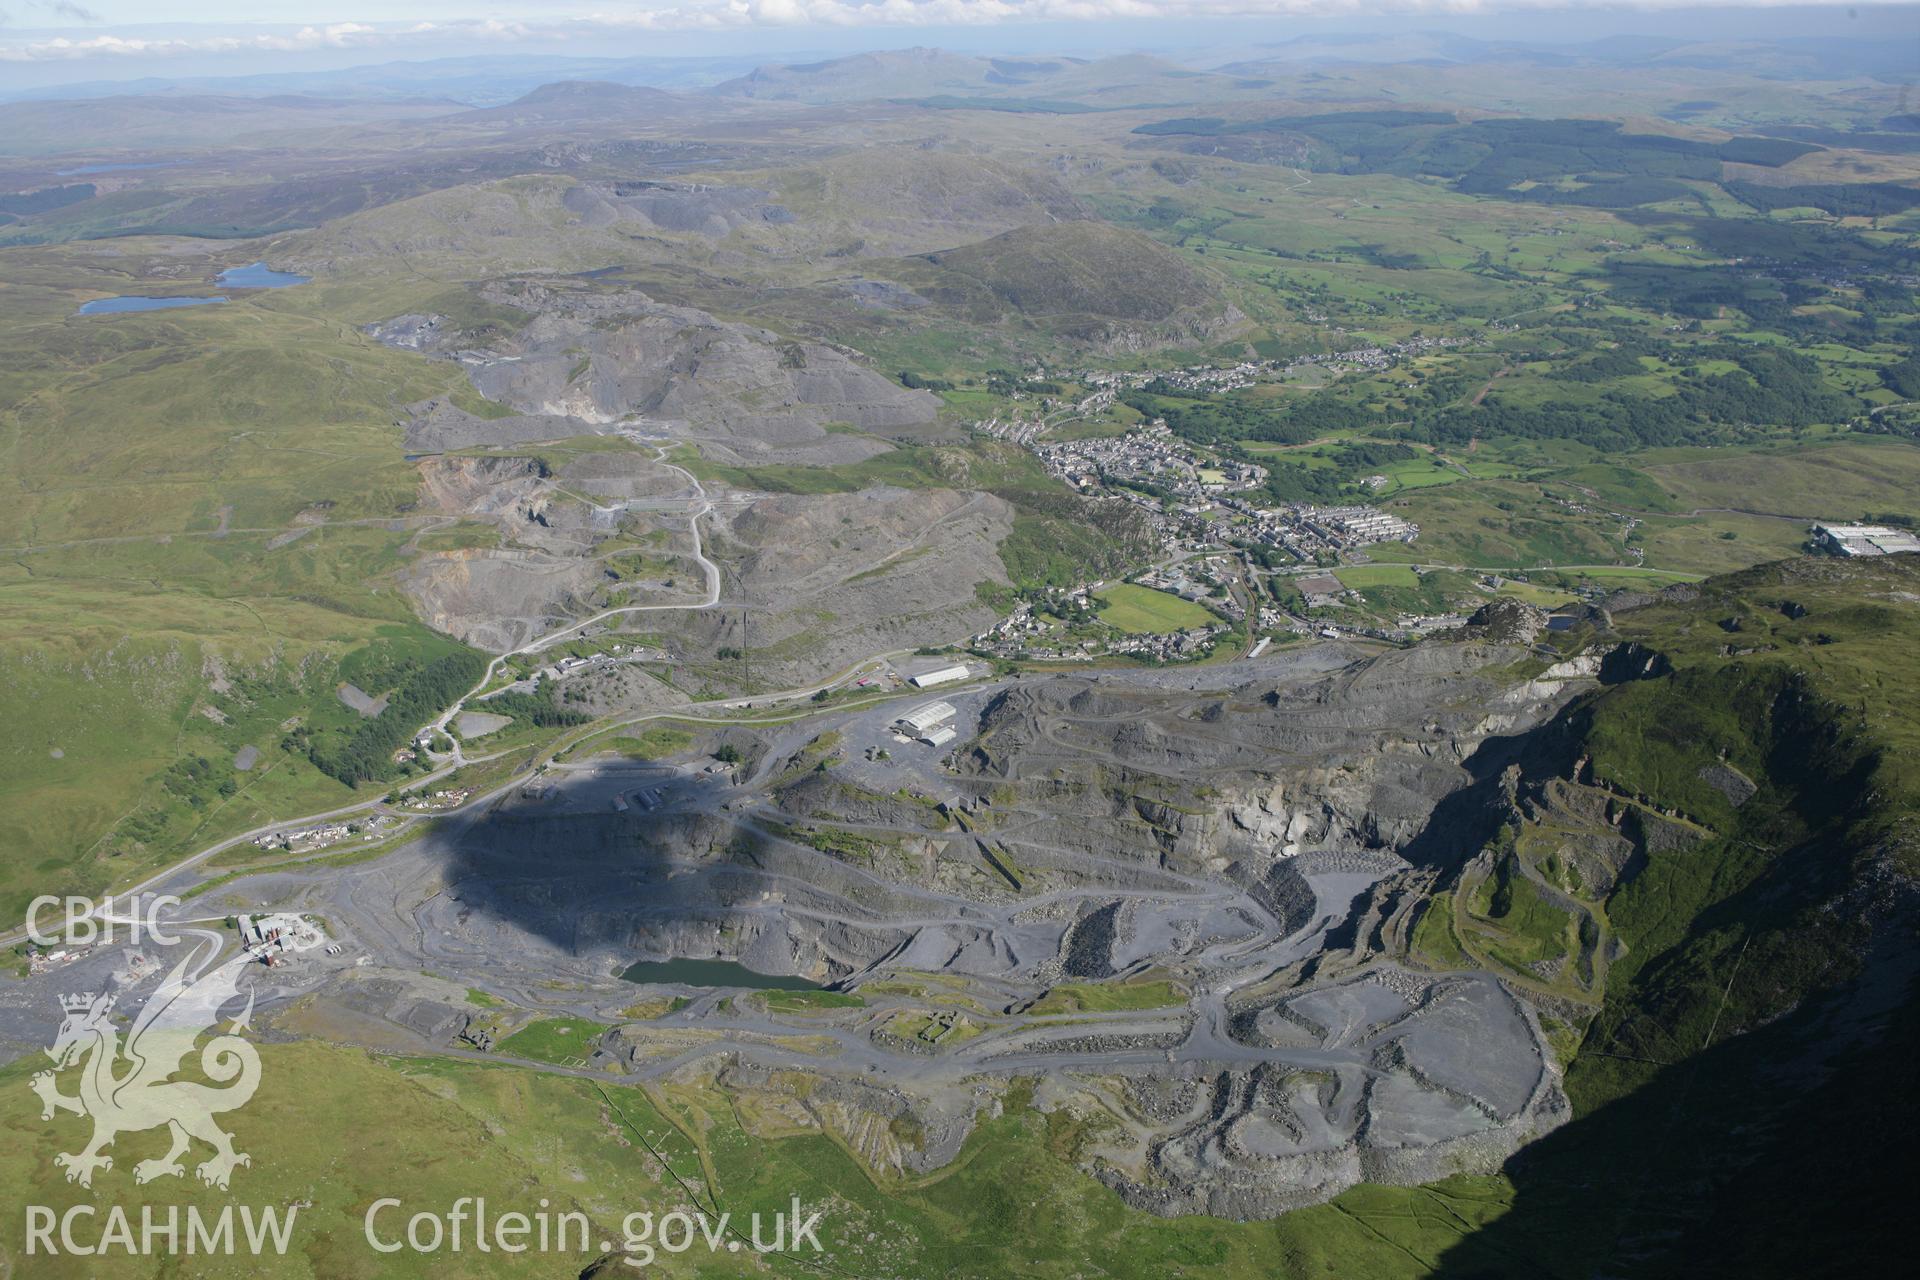 RCAHMW colour oblique photograph of Oakeley Slate Quarry, landscape view to Blaenau Ffestiniog. Taken by Toby Driver on 20/07/2011.